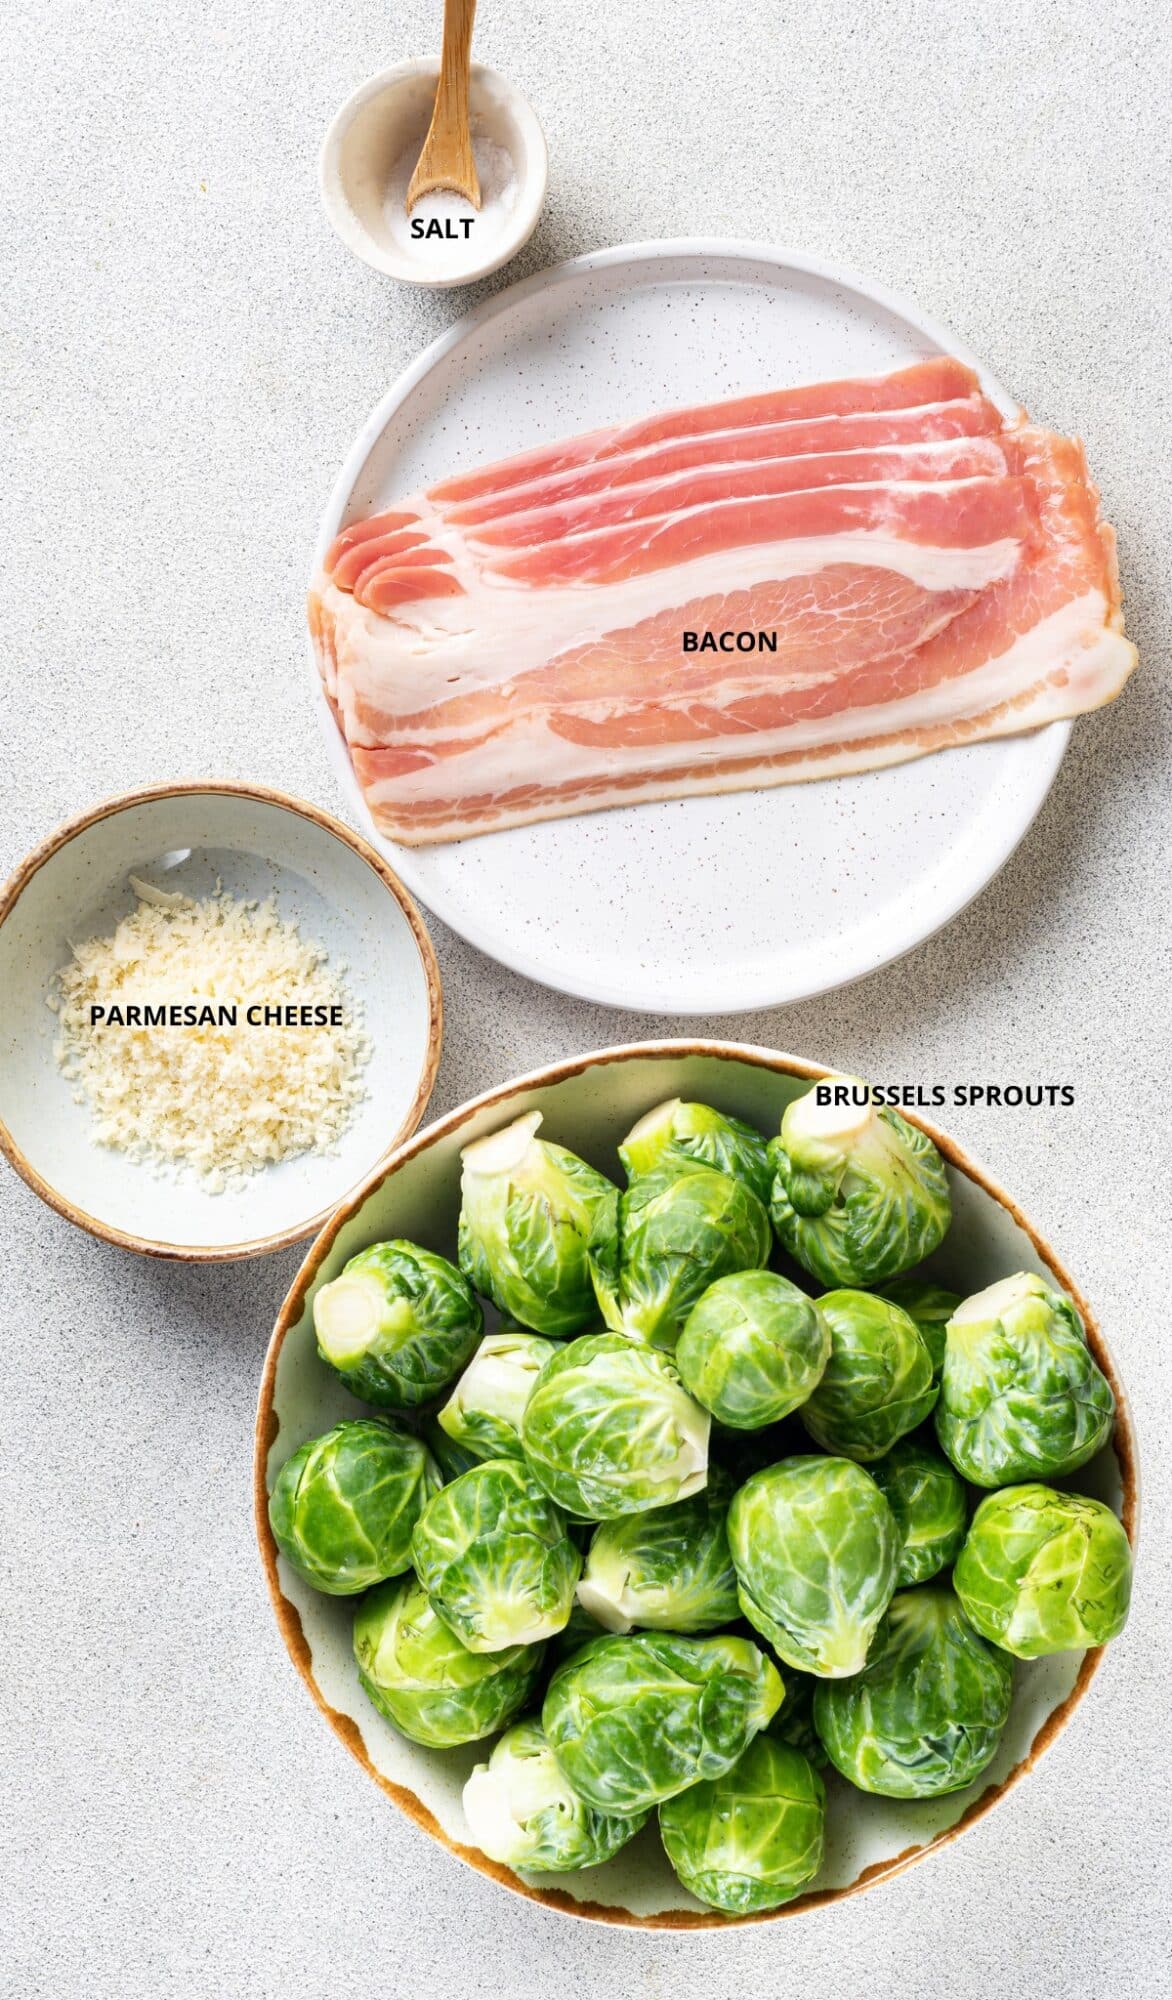 Brussels Sprouts in a bowl with grated parmesan cheese in another small bowl and raw bacon slices on a plate with salt and wooden spoon on the side.